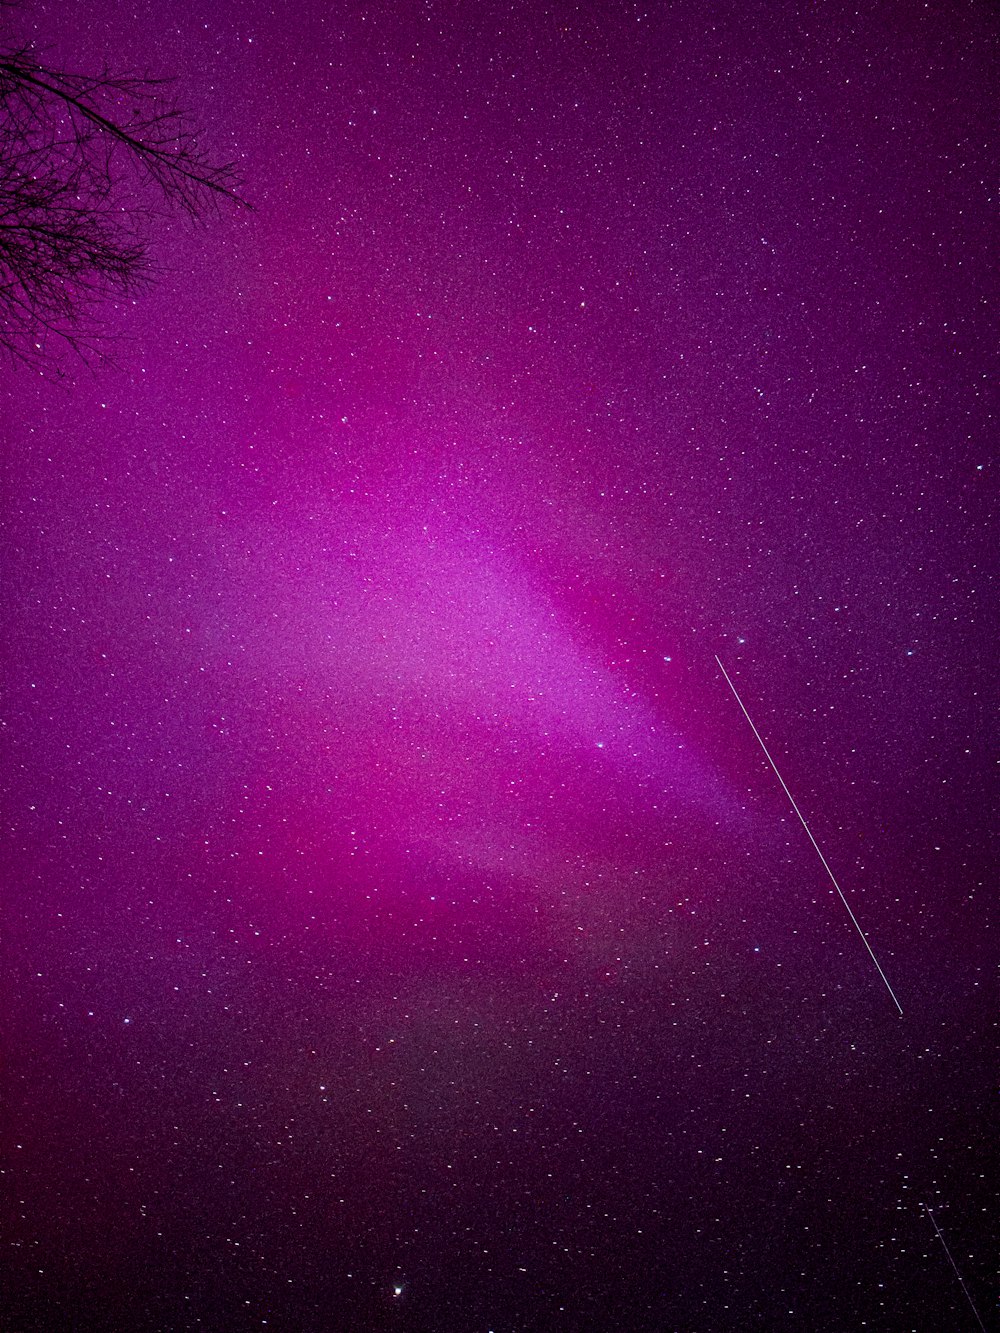 a purple sky with stars and a plane in the distance